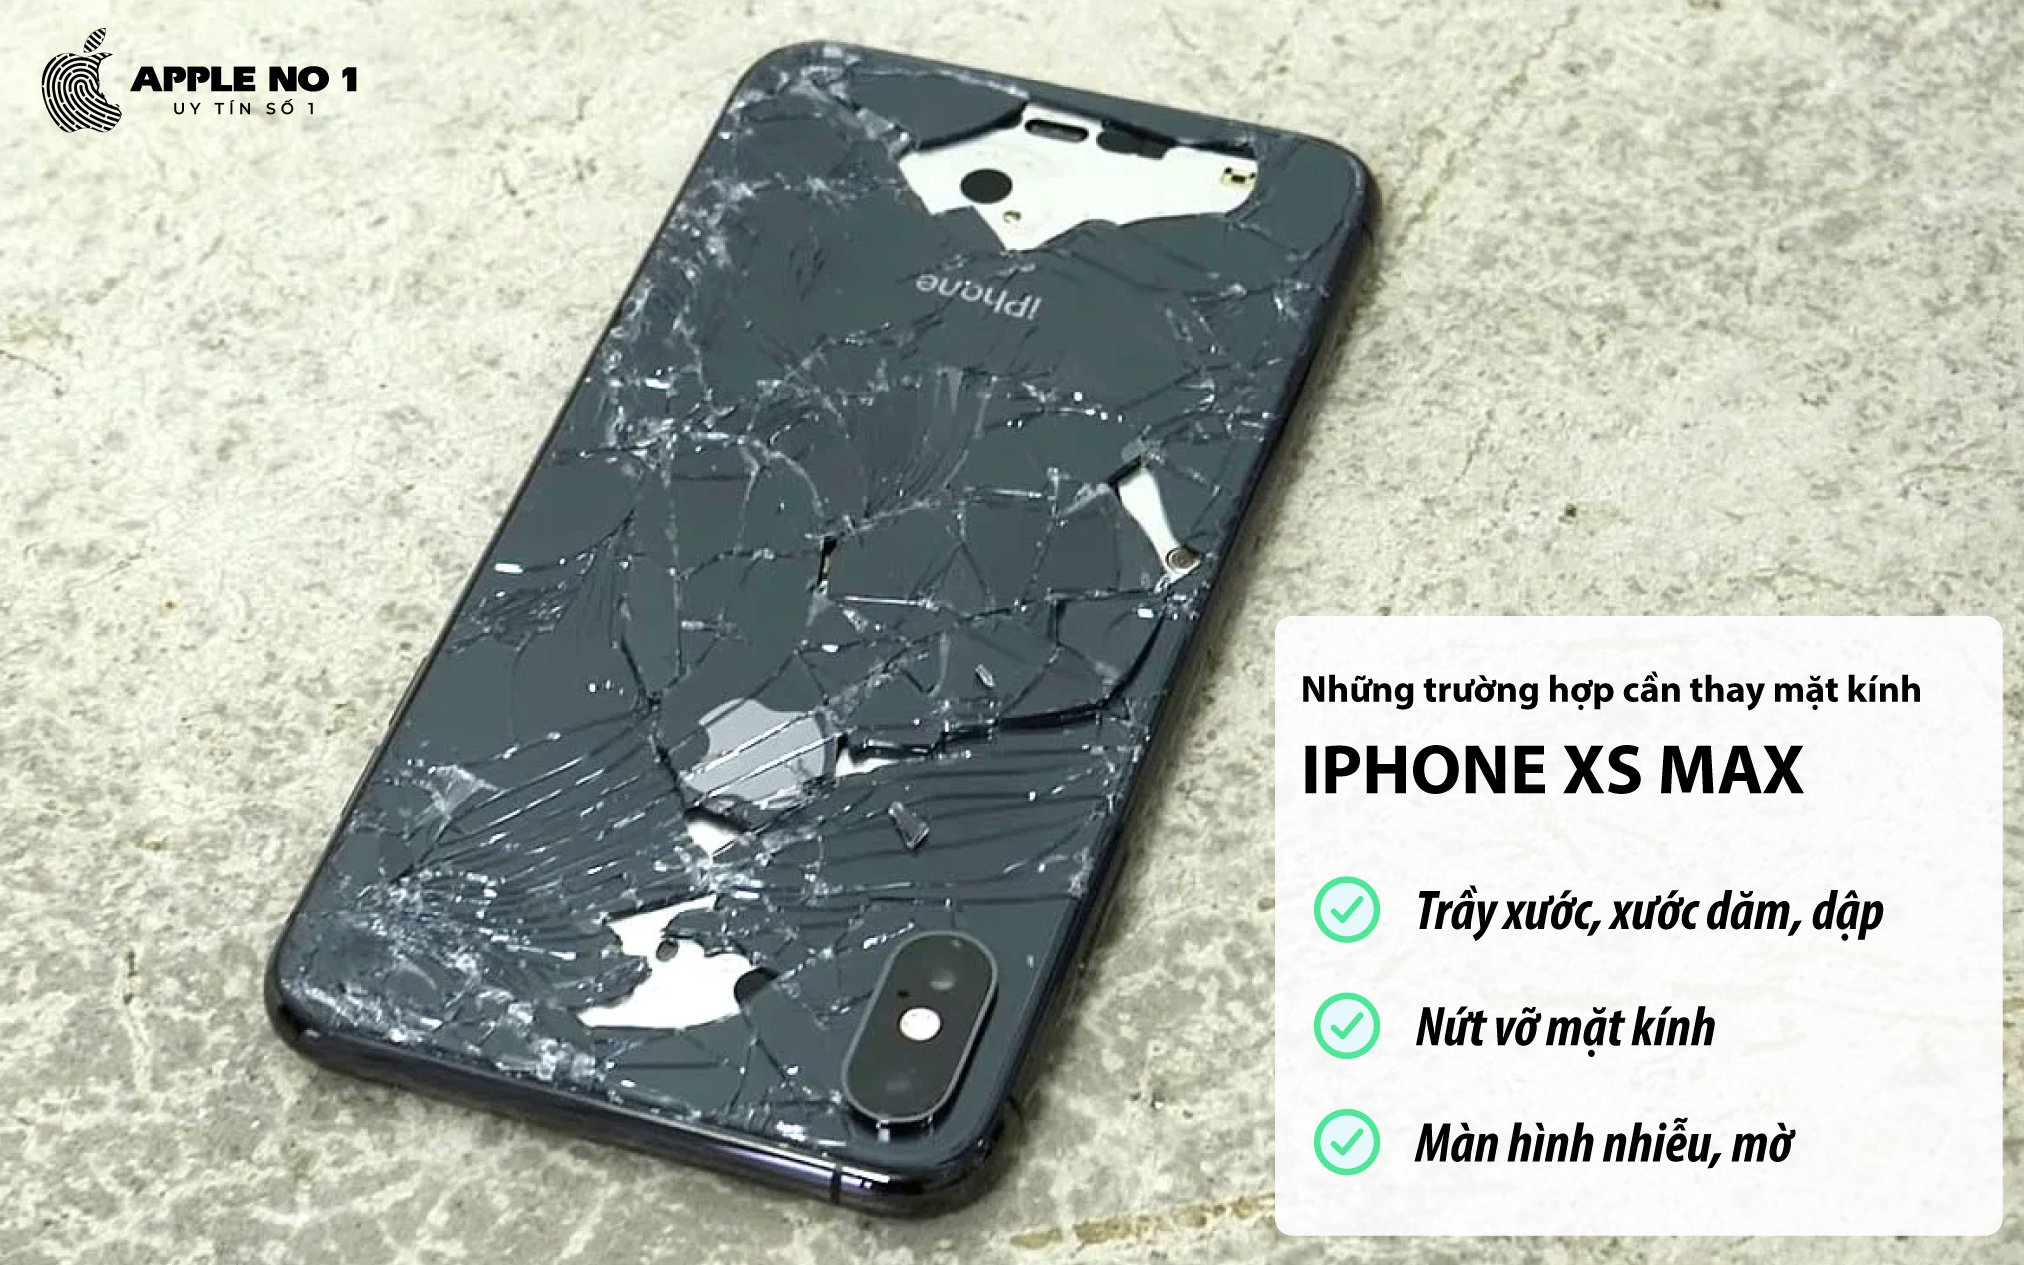 nhung truong hop can phai thay ep kinh iphone xs max